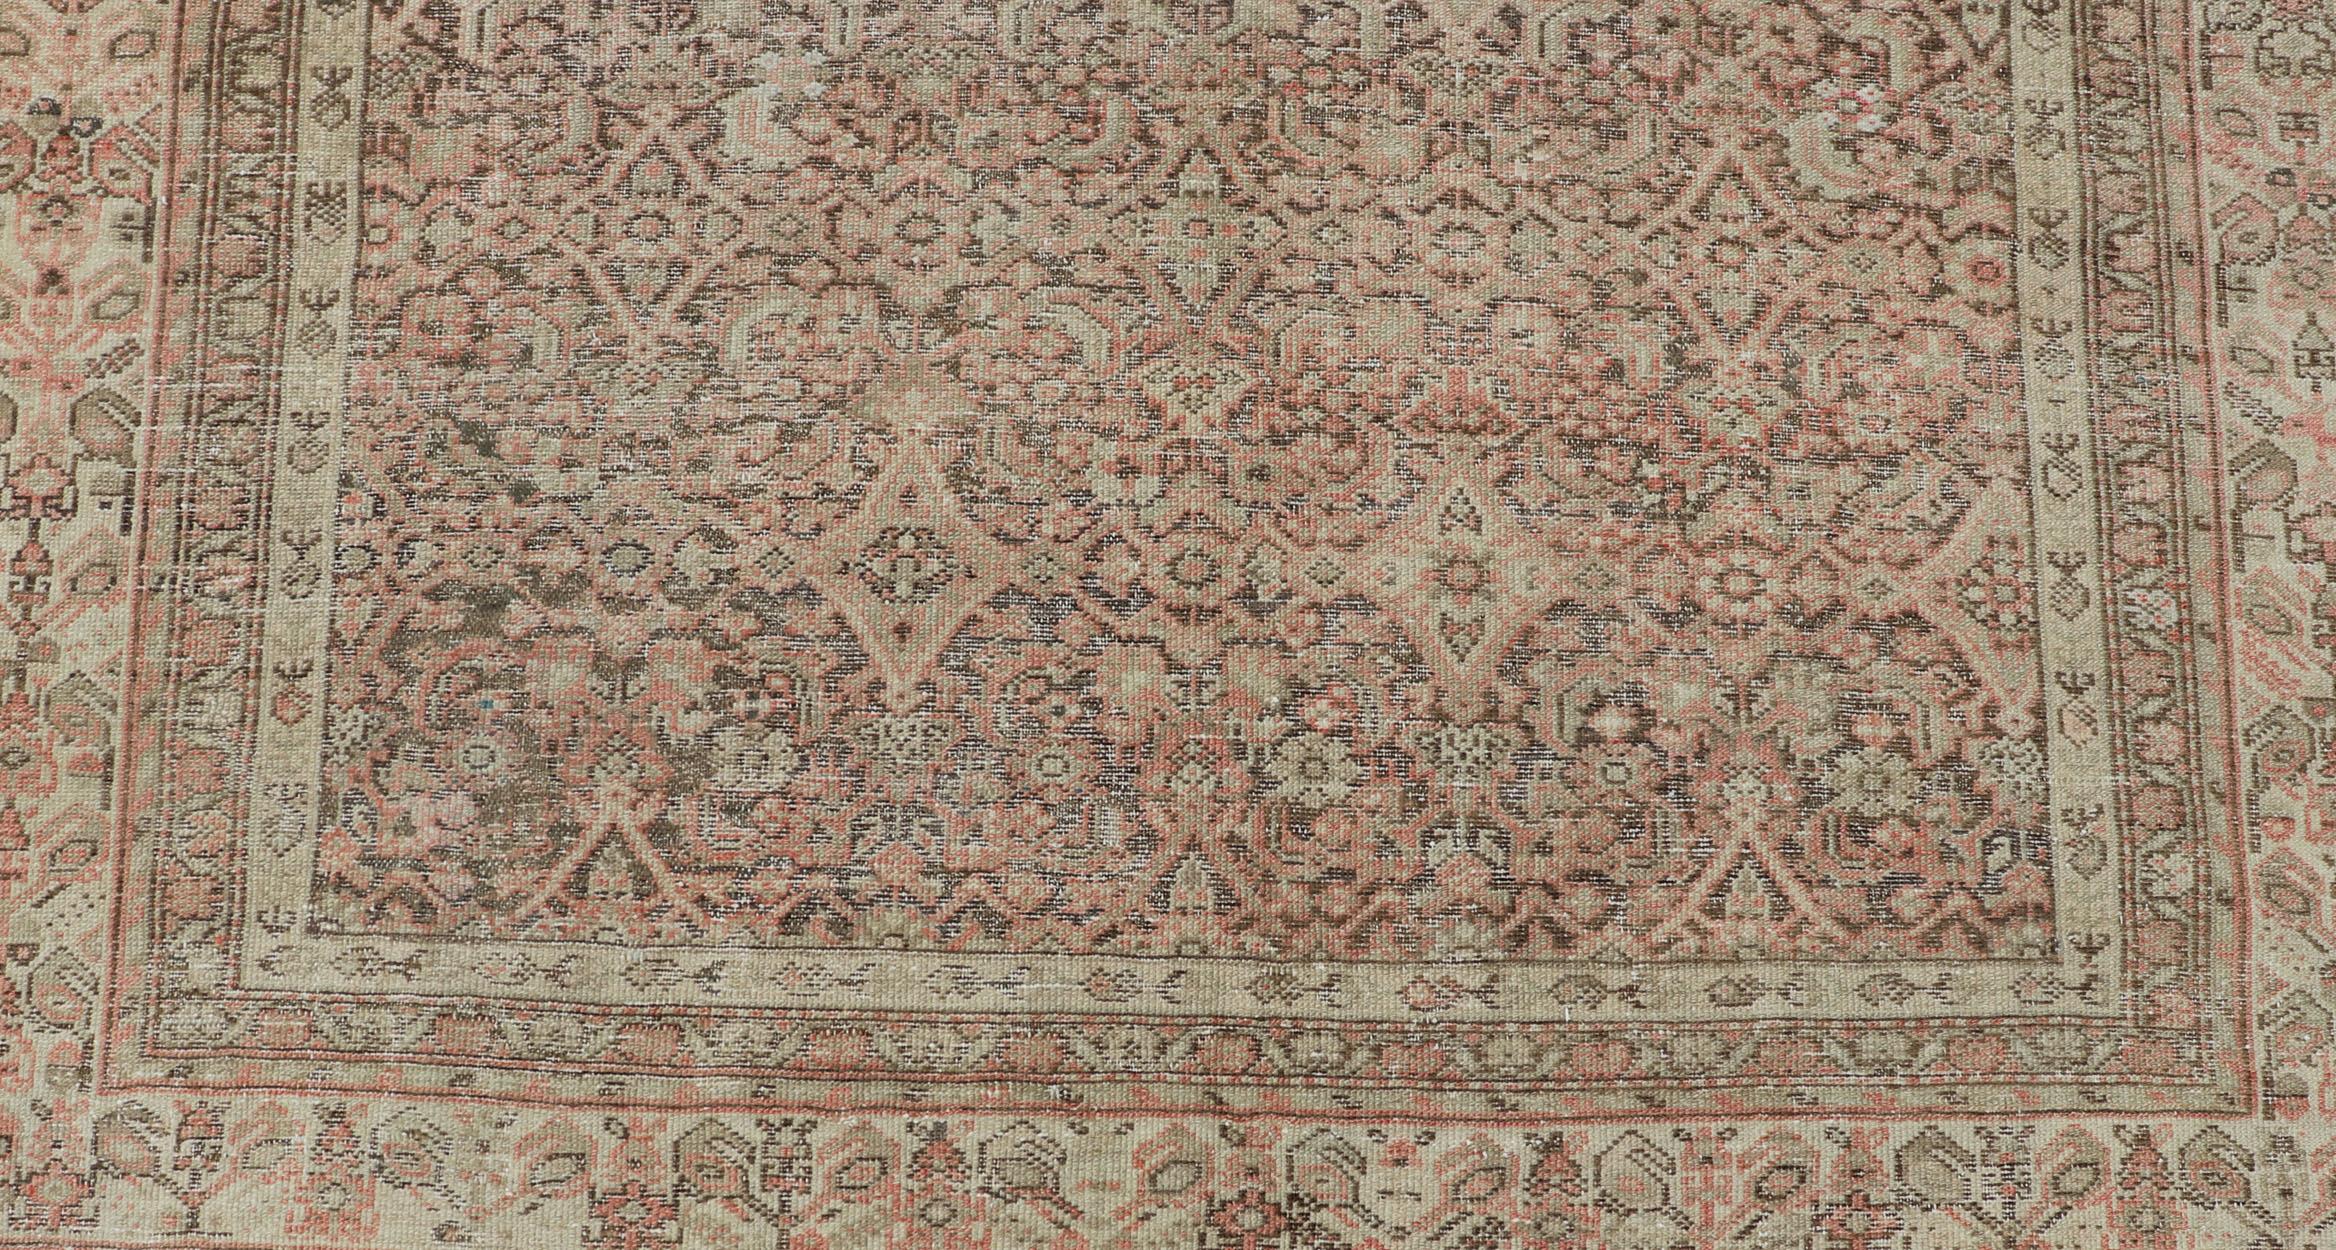 19th Century Antique Malayer Persian Gallery with All Over Design within Multi-Tier Border For Sale